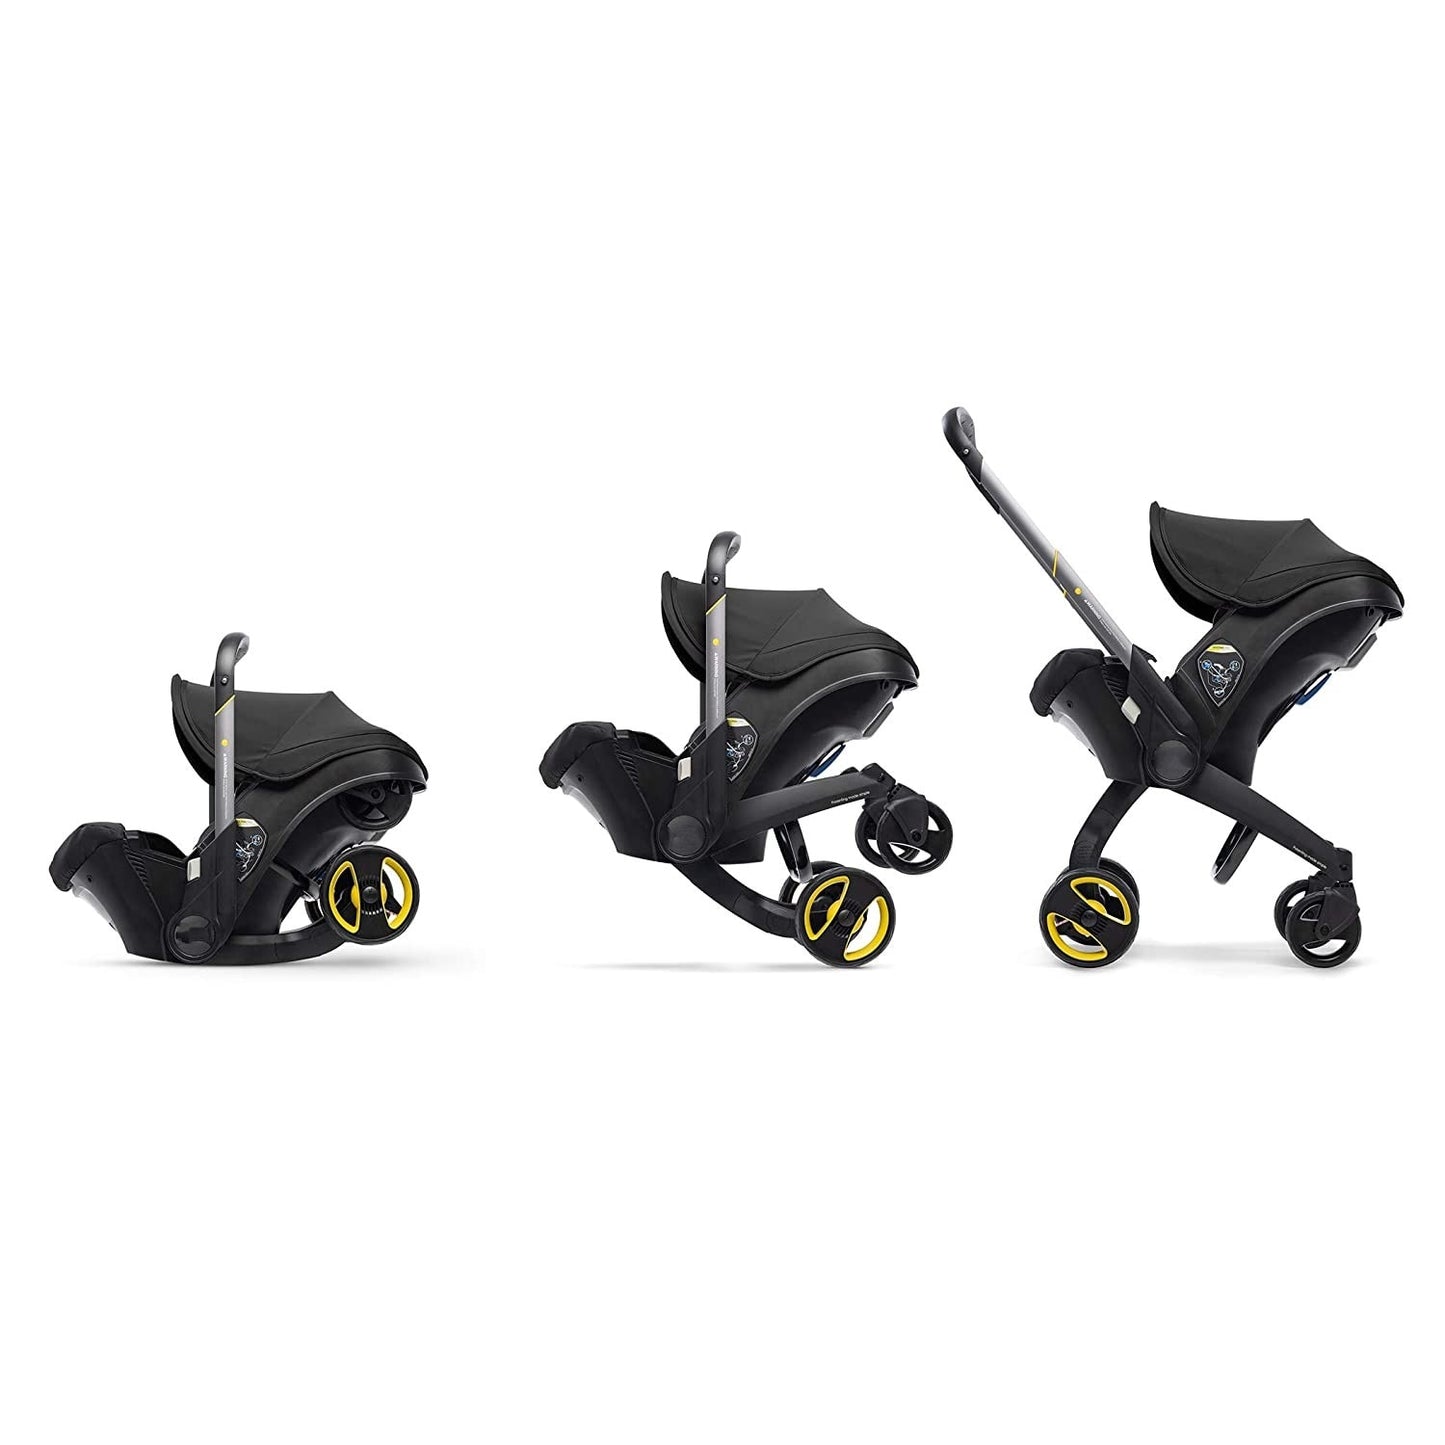 Newborn Stroller: S800 Foldable Stroller/Car Seat with Natural Rubber Wheels